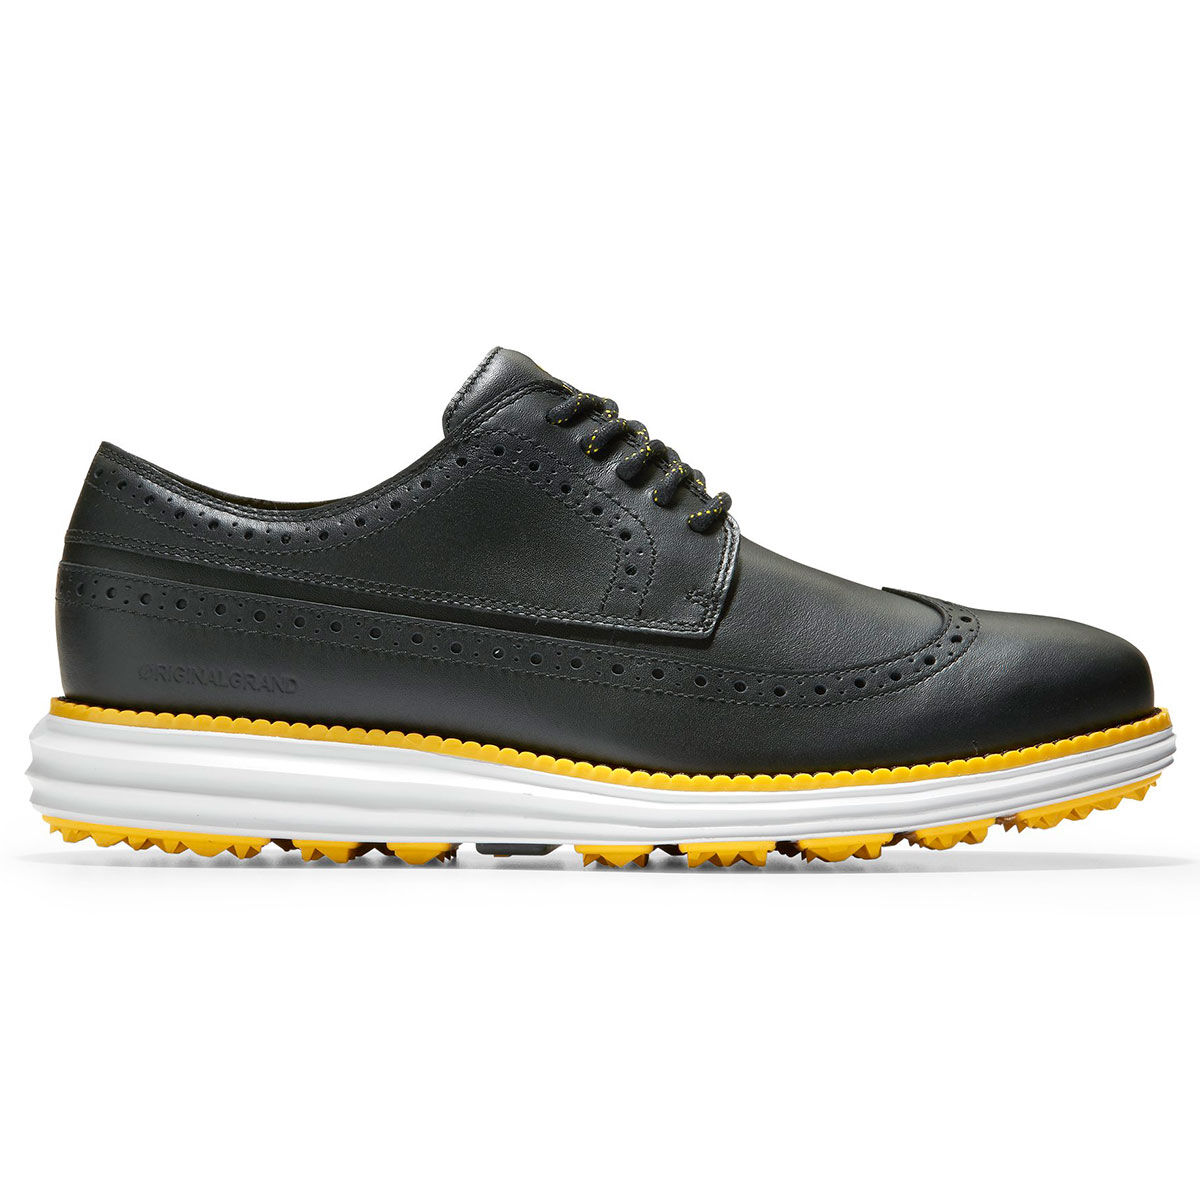 Cole Haan Mens Black and White OriginalGrand Wing Oxford Golf Shoes, Size: 7 | American Golf von Cole Haan